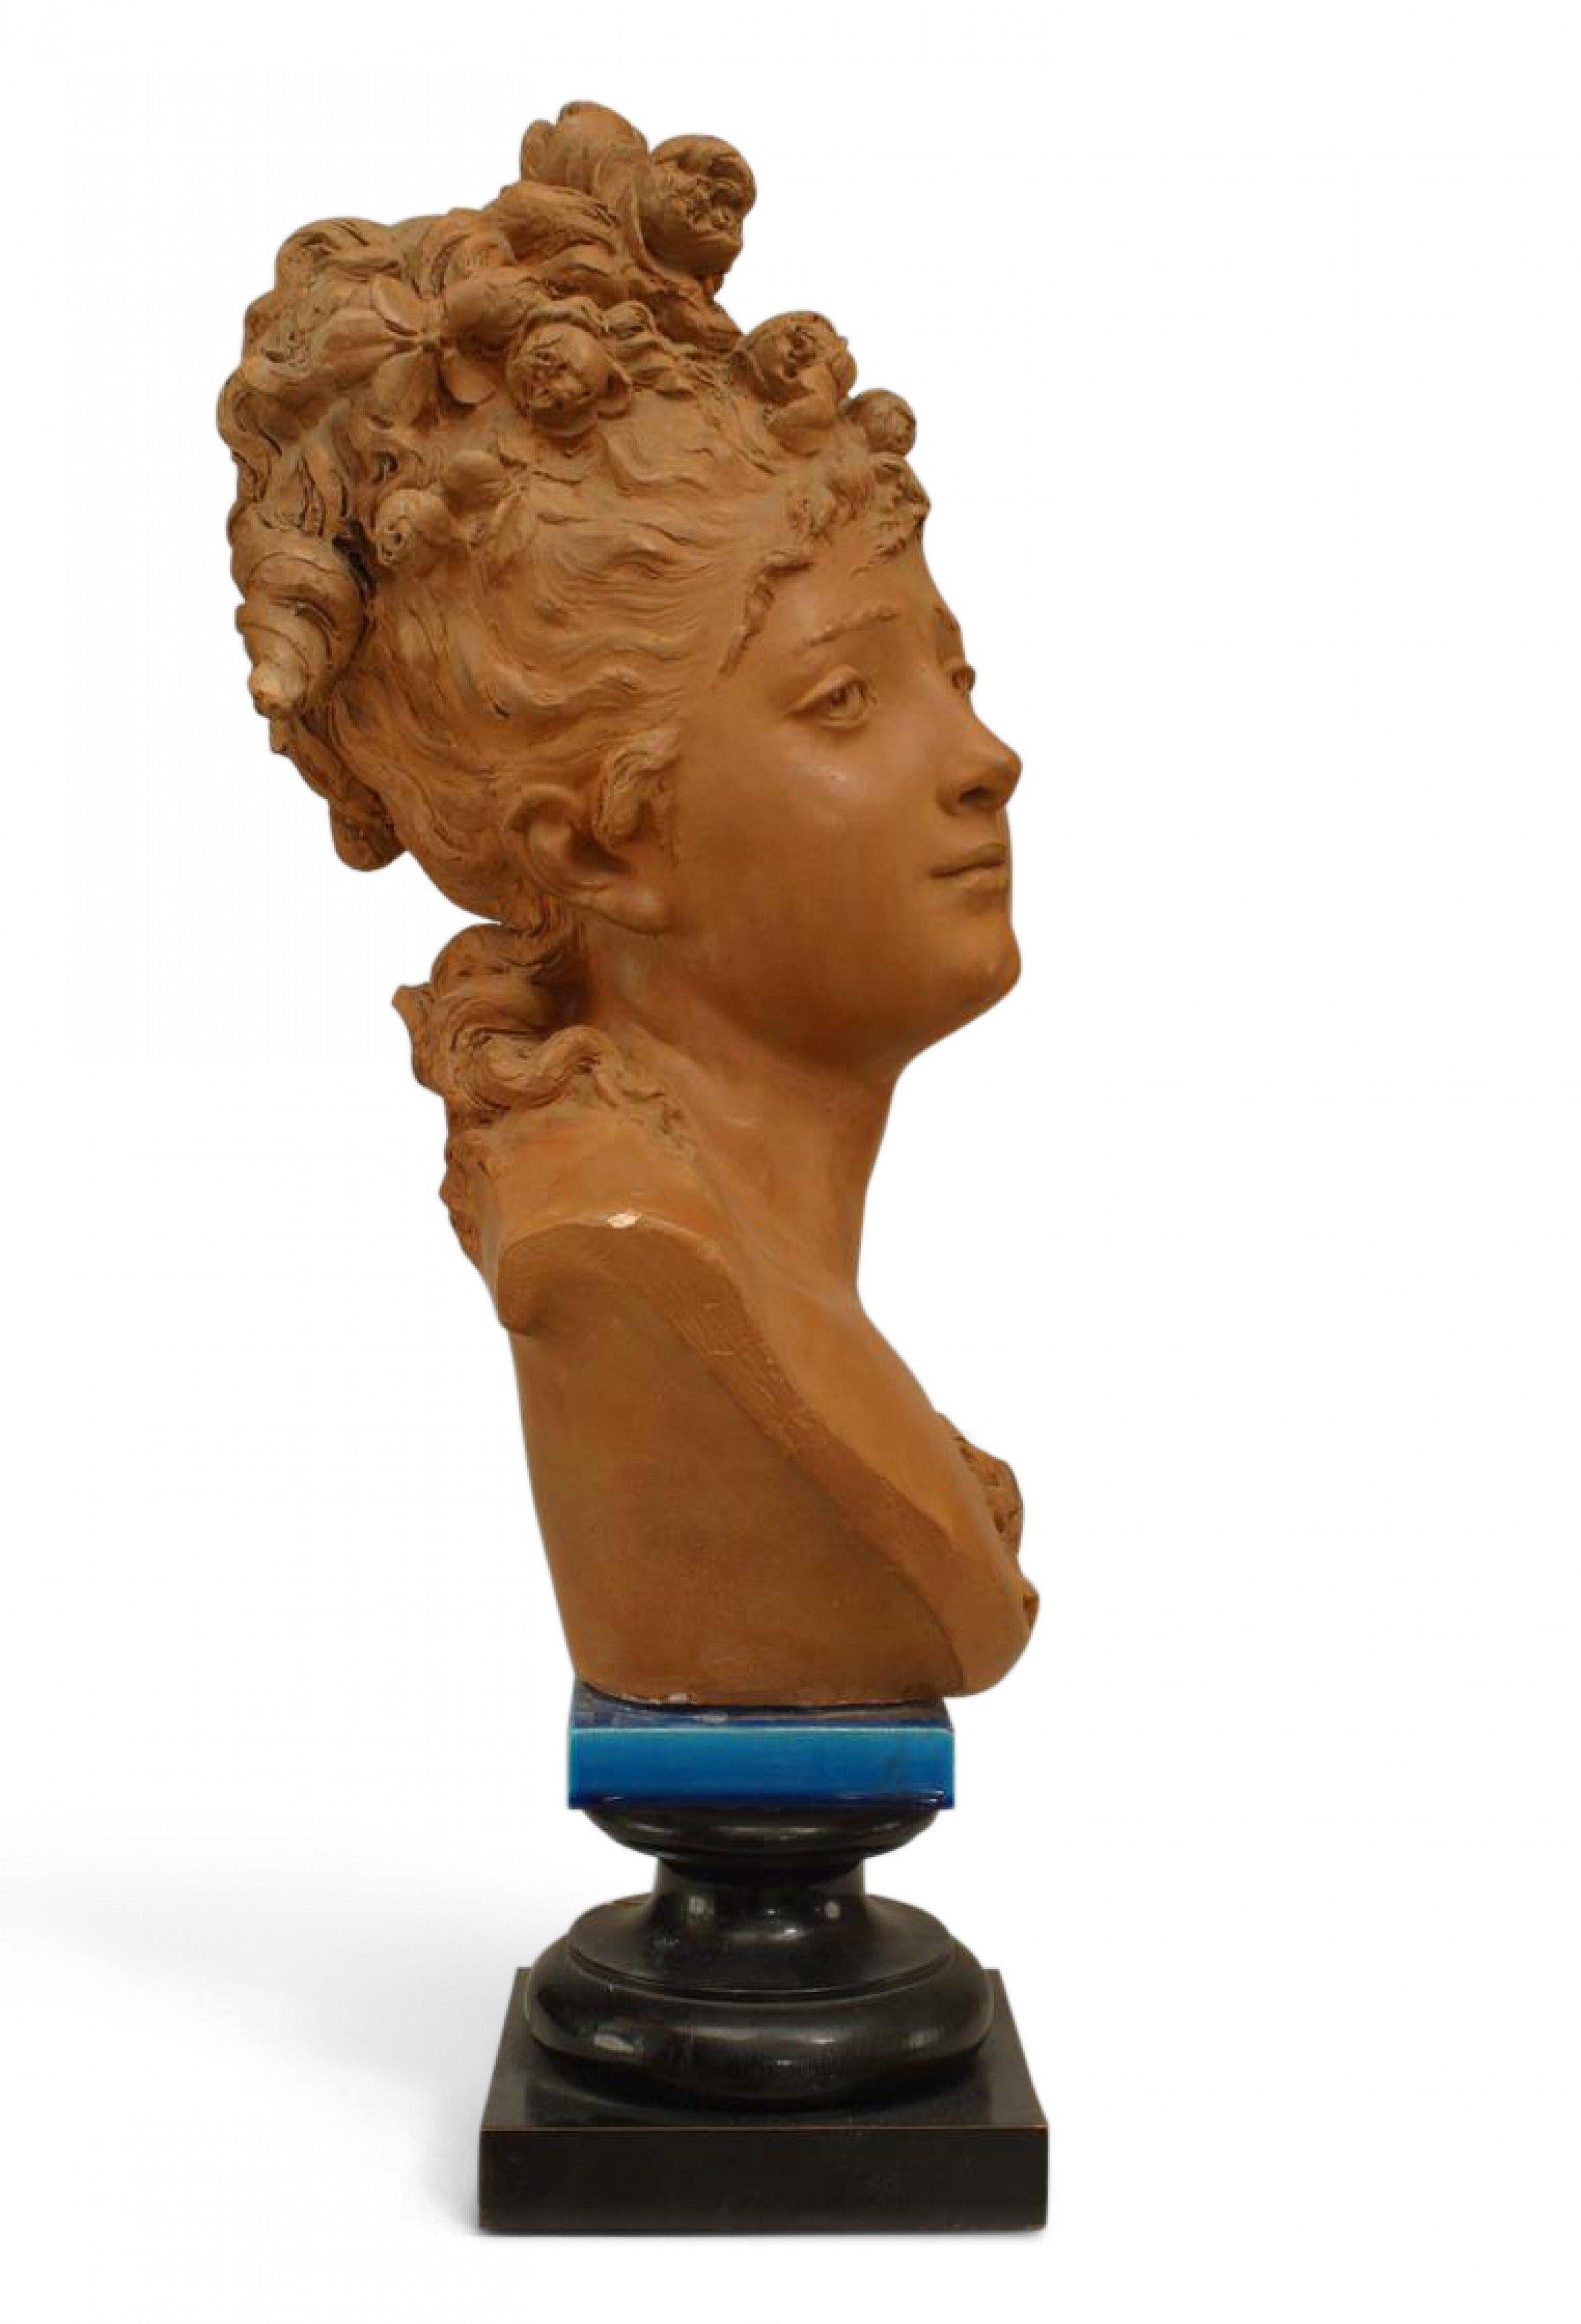 French Victorian terra cotta bust of 19th century lady with flowers in hair on blue porcelain & black painted square base (signed CARRIER BELLEUSE).
  